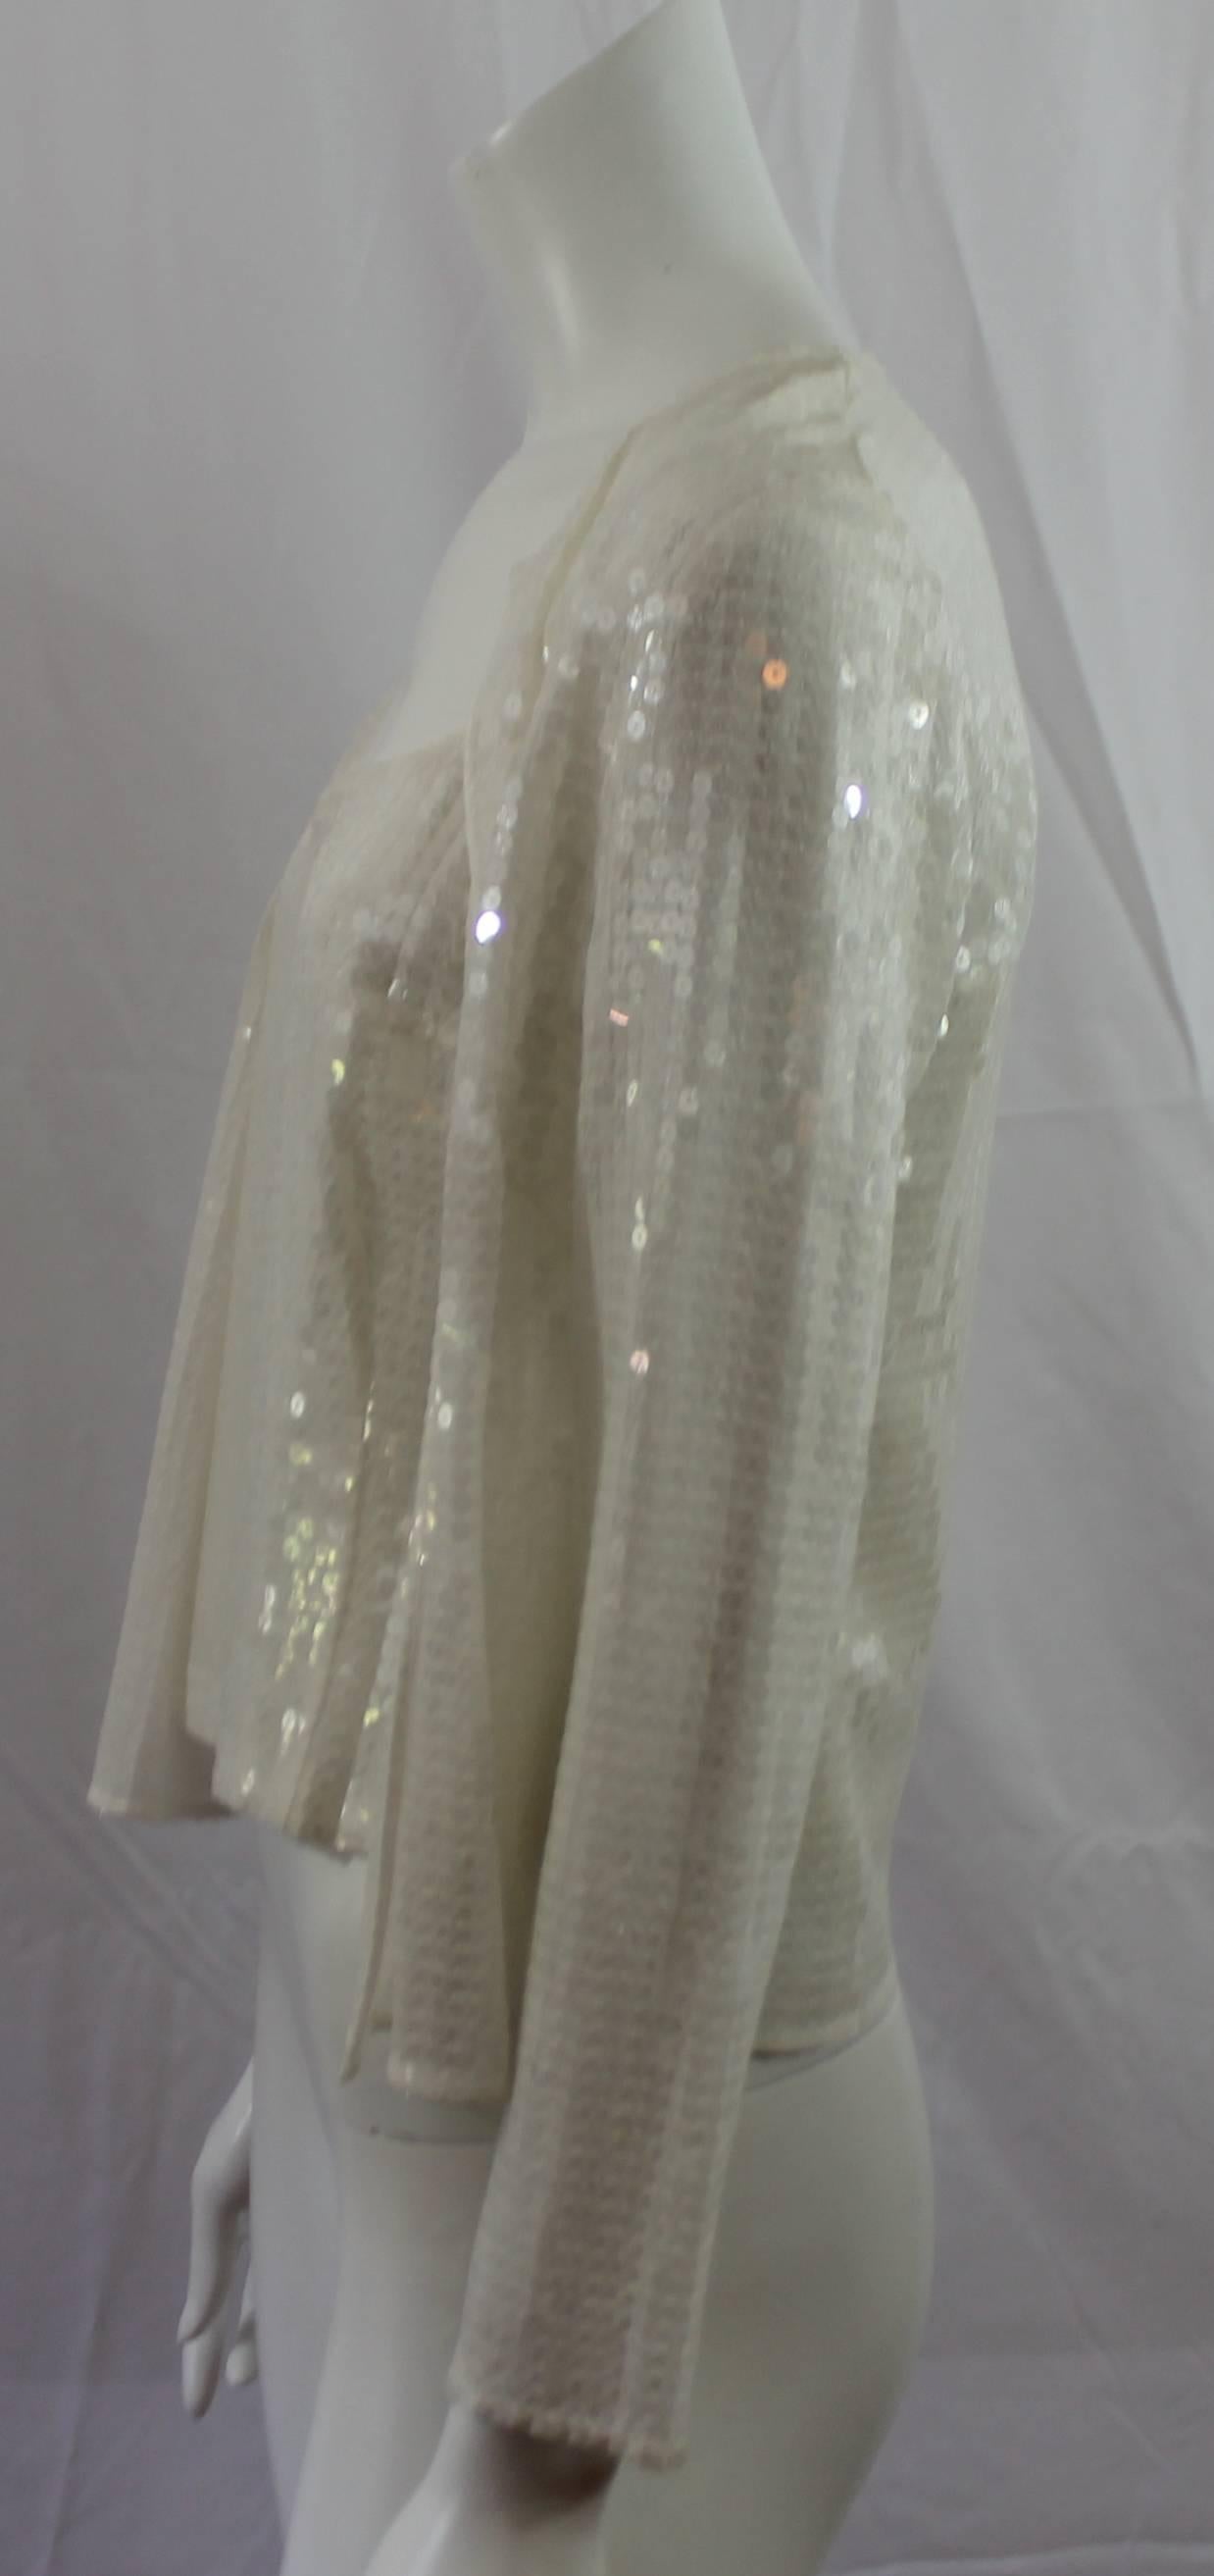 Akris Punto White Silk & Sequin 2 pc Cami and Jacket - 8  This beautiful set is a perfect piece for a summer evening out. Cami has side zipper. This item is in excellent condition.
Measurements:
Cami:  Bust 36